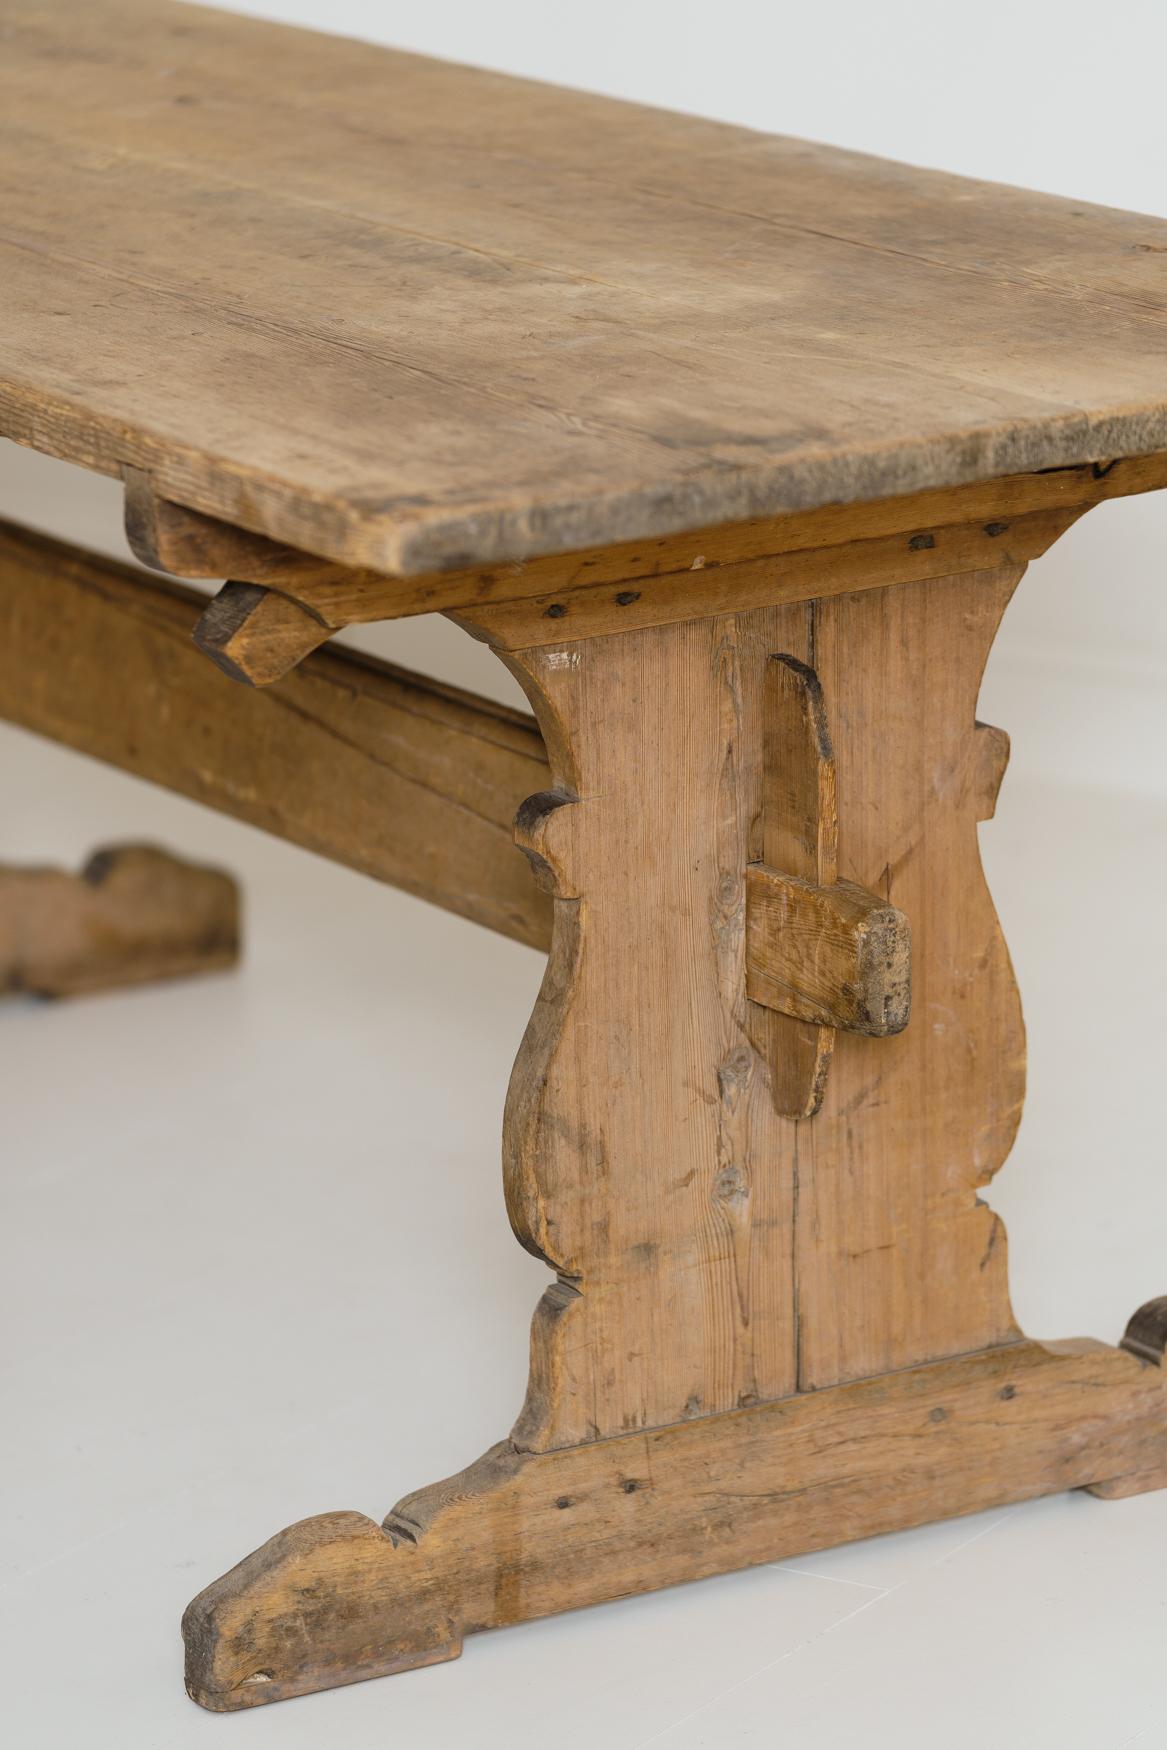 A charming Swedish trestle dining table, circa 1770, with a deep, honey-colored patina. It has a beautiful plank top with central stretcher and shaped sides. This rustic allmoge (countryfolk) table has a time worn, untouched, original patina.  The